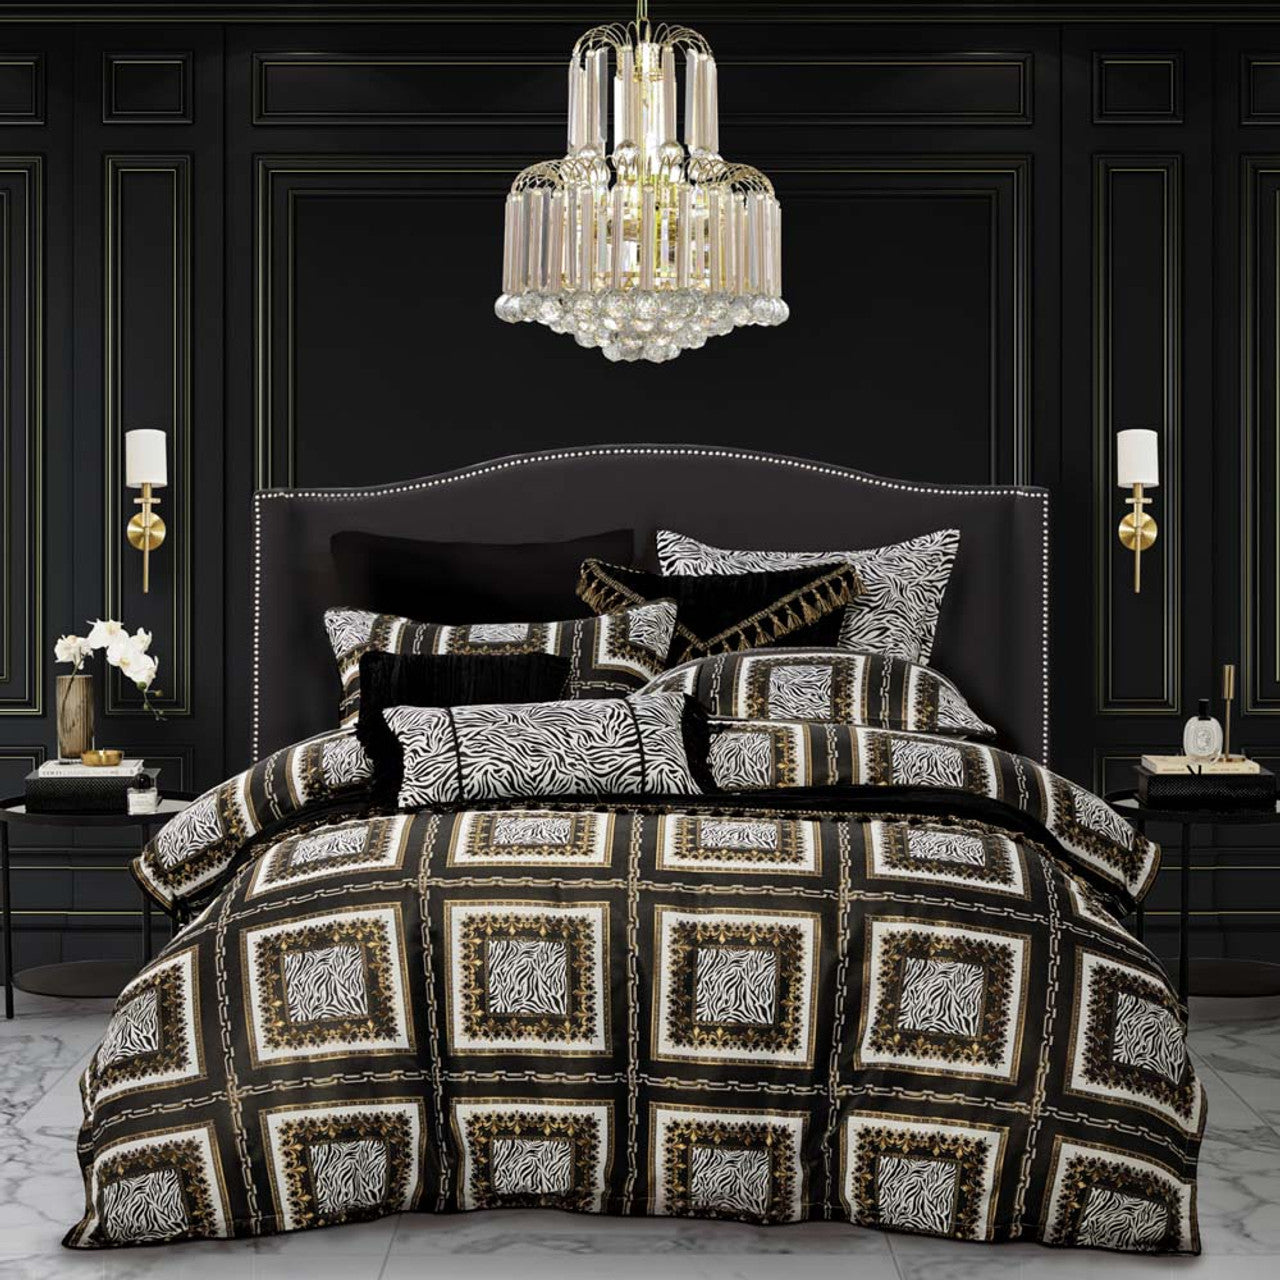 Drawing inspiration from Europe's fashion runways, the Davinci Piazza Gold Bed Quilt Cover Set is a true statement of style. This captivating ensemble combines classic Baroque elements with an unexpected twist of exotic zebra print, resulting in a contemporary and eclectic design.